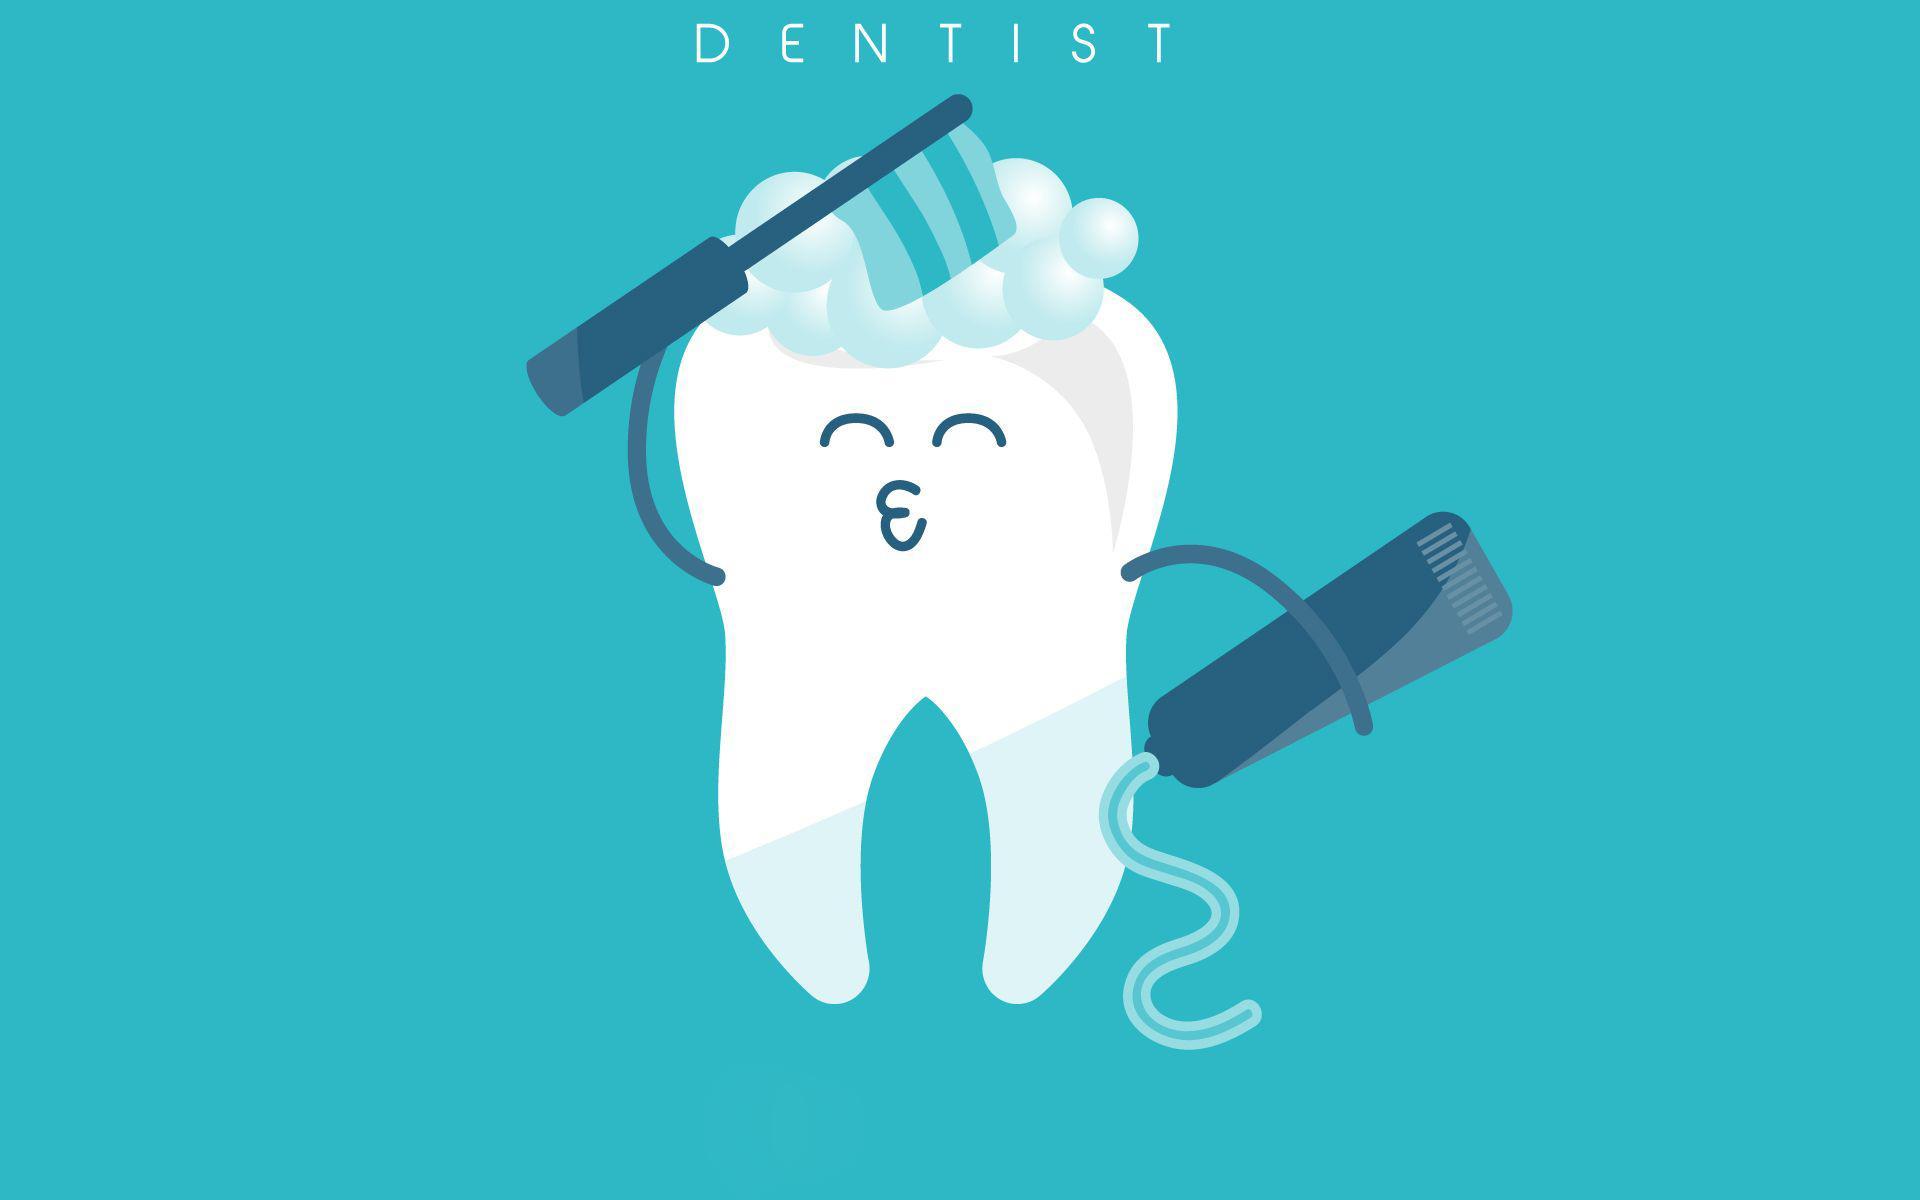 A tooth with toothpaste and toothbrush on a blue background - Dentist